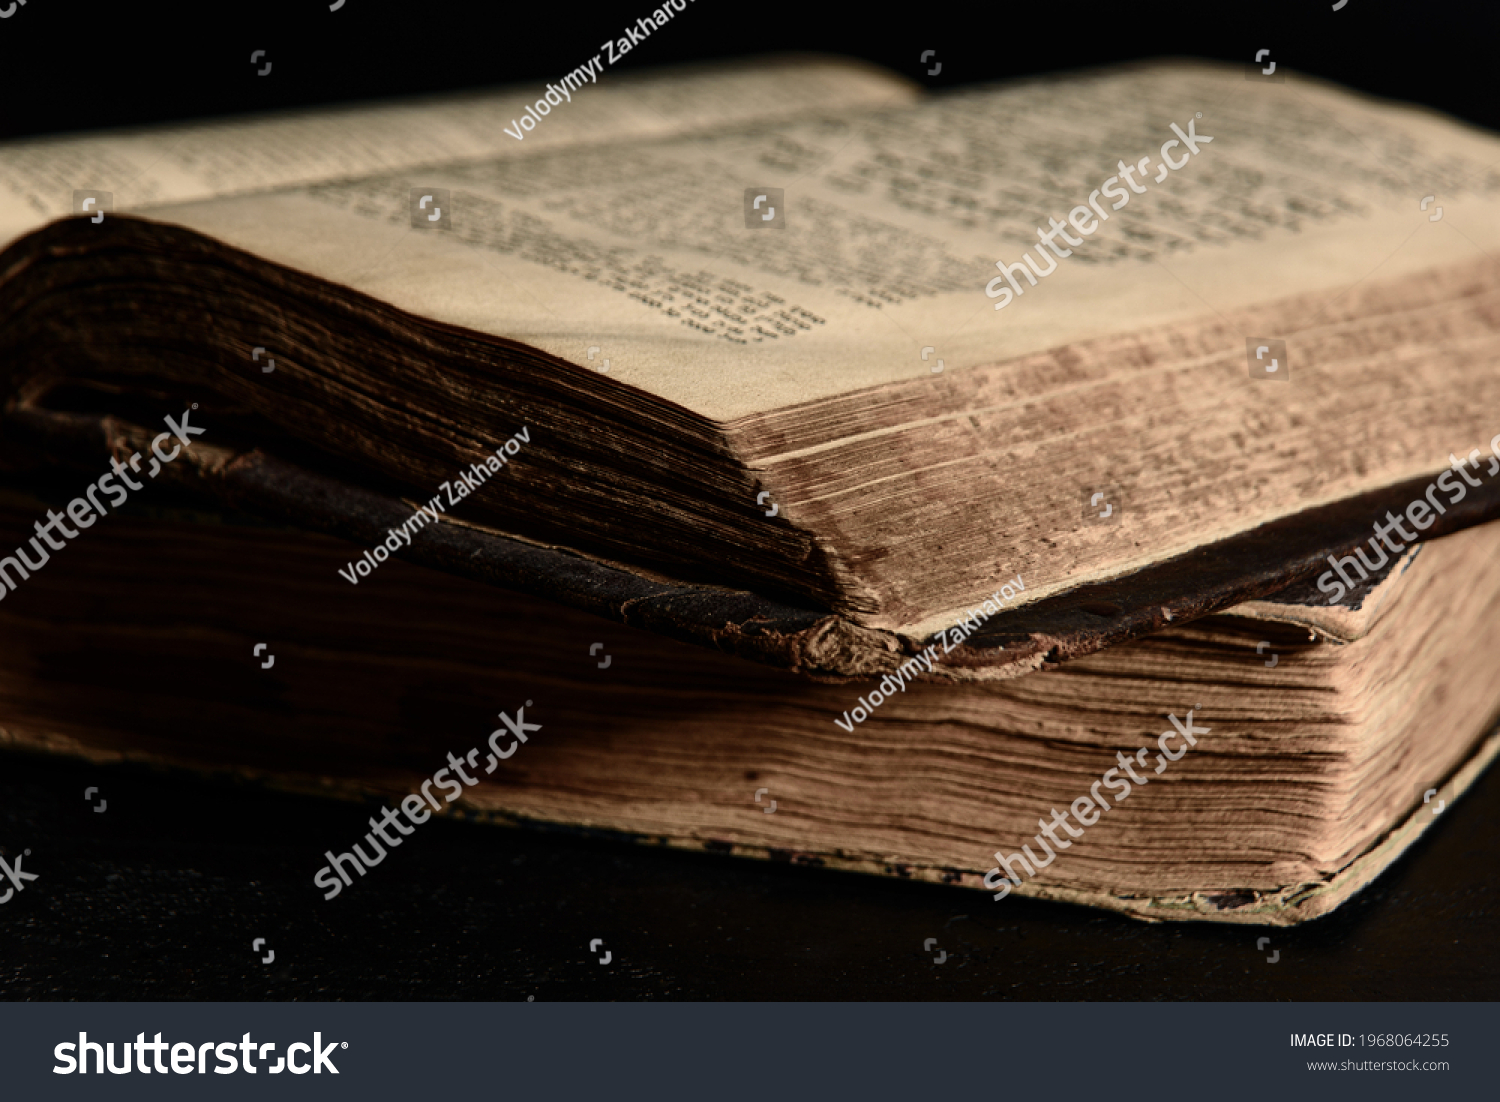 Jewish Bible. Selective focus. Old worn Jewish books. Opened scripture pages. Closeup #1968064255